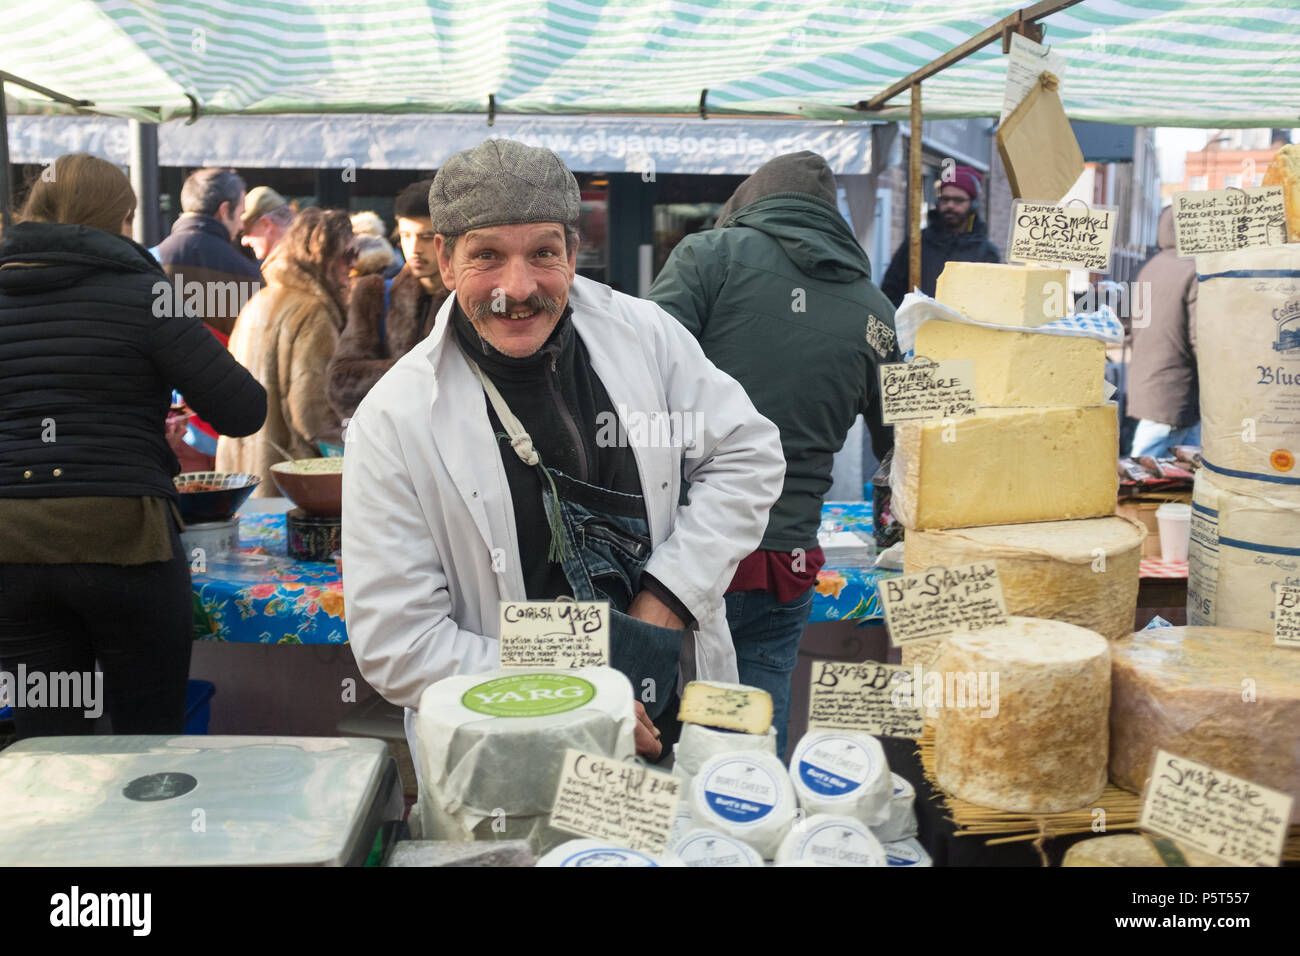 Charming Smiling Moustached Man Selling a Variety of Handmade Artisan Cheeses at Broadway Street Market in Hackney, London, England, UK, Europe. Stock Photo